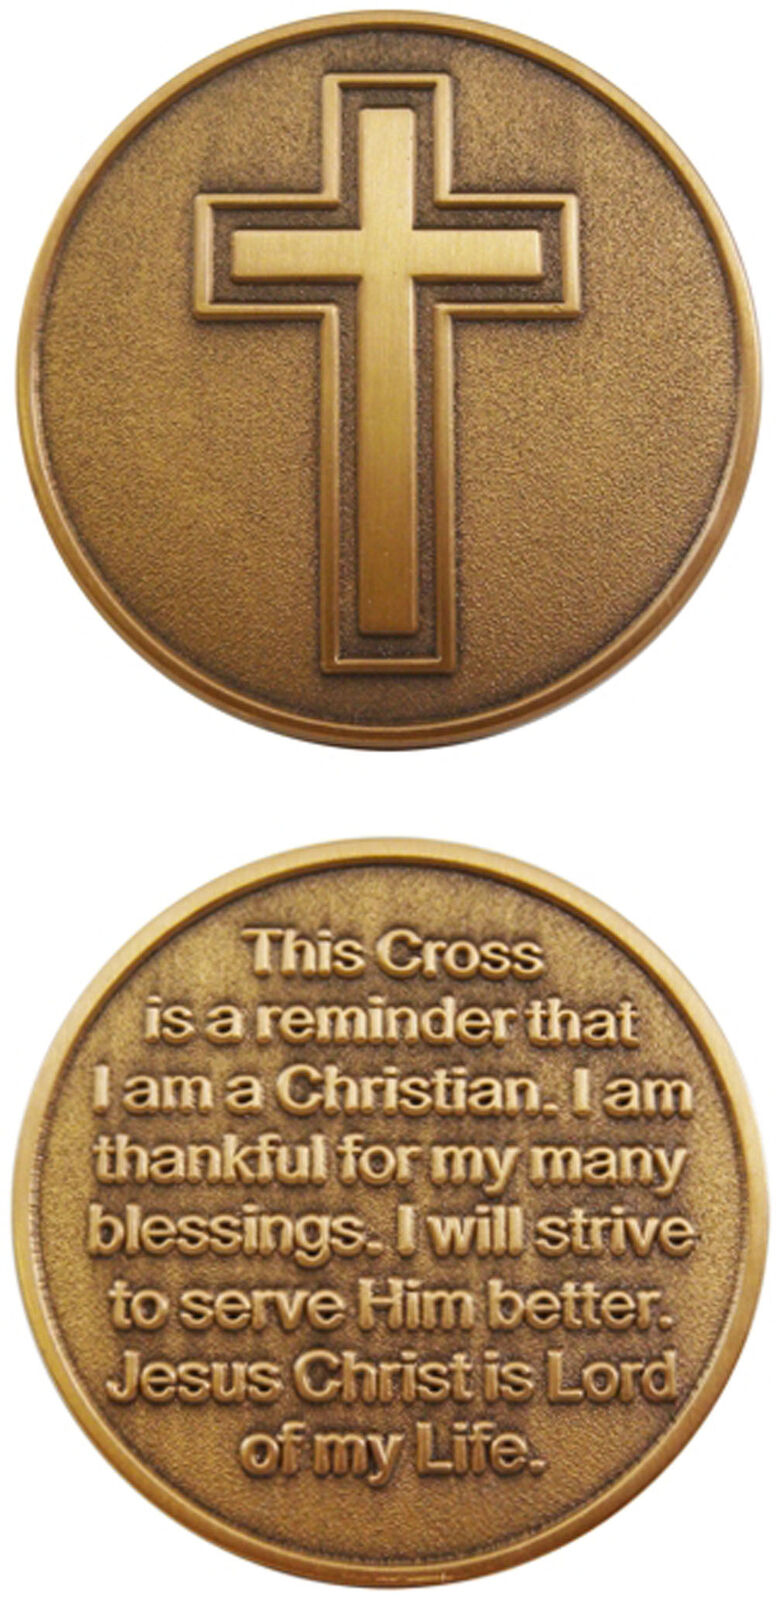 Christian Cross / Jesus Christ is Lord - Challenge Coin 2575